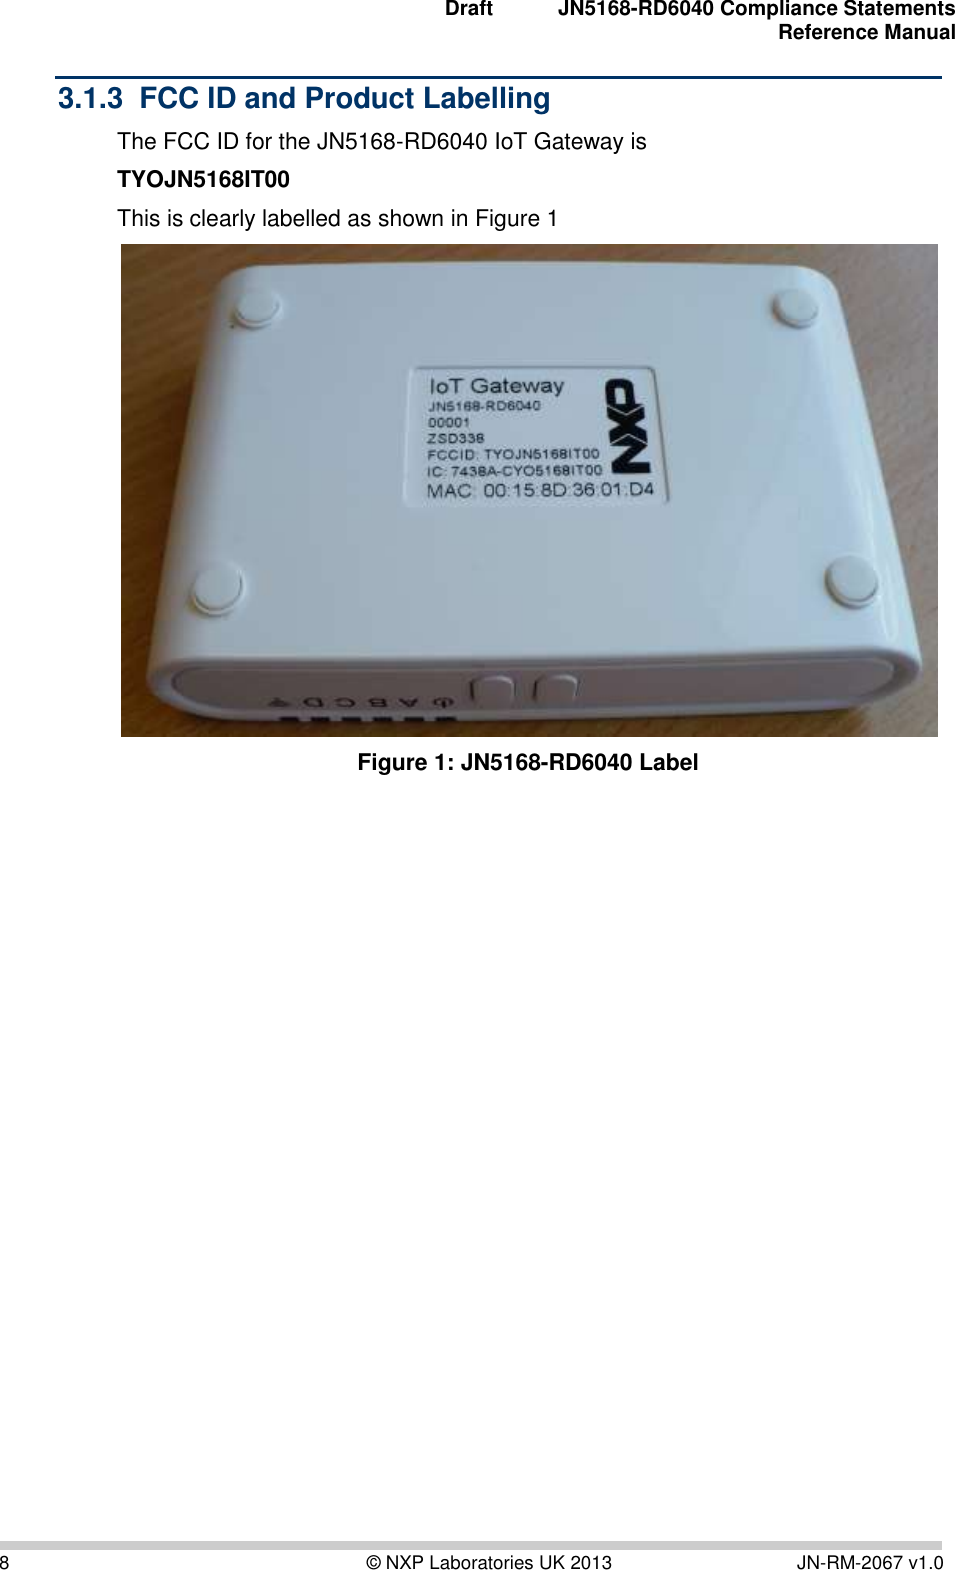  Draft JN5168-RD6040 Compliance Statements Reference Manual  8  © NXP Laboratories UK 2013  JN-RM-2067 v1.0 3.1.3  FCC ID and Product Labelling The FCC ID for the JN5168-RD6040 IoT Gateway is  TYOJN5168IT00 This is clearly labelled as shown in Figure 1  Figure 1: JN5168-RD6040 Label     